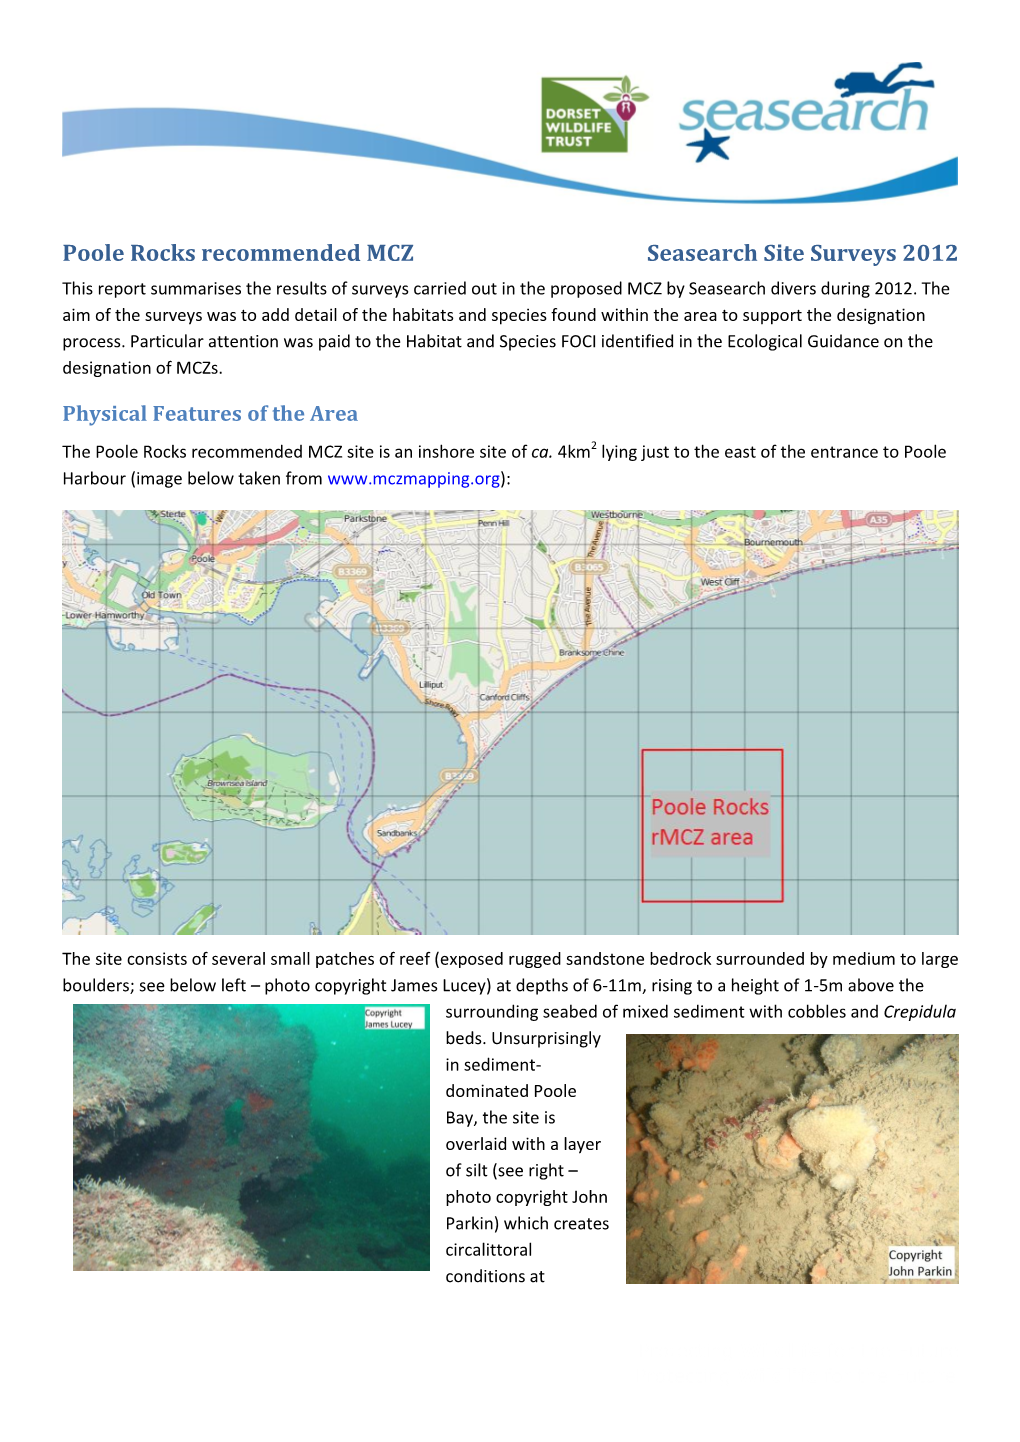 Poole Rocks Recommended MCZ Seasearch Site Surveys 2012 This Report Summarises the Results of Surveys Carried out in the Proposed MCZ by Seasearch Divers During 2012